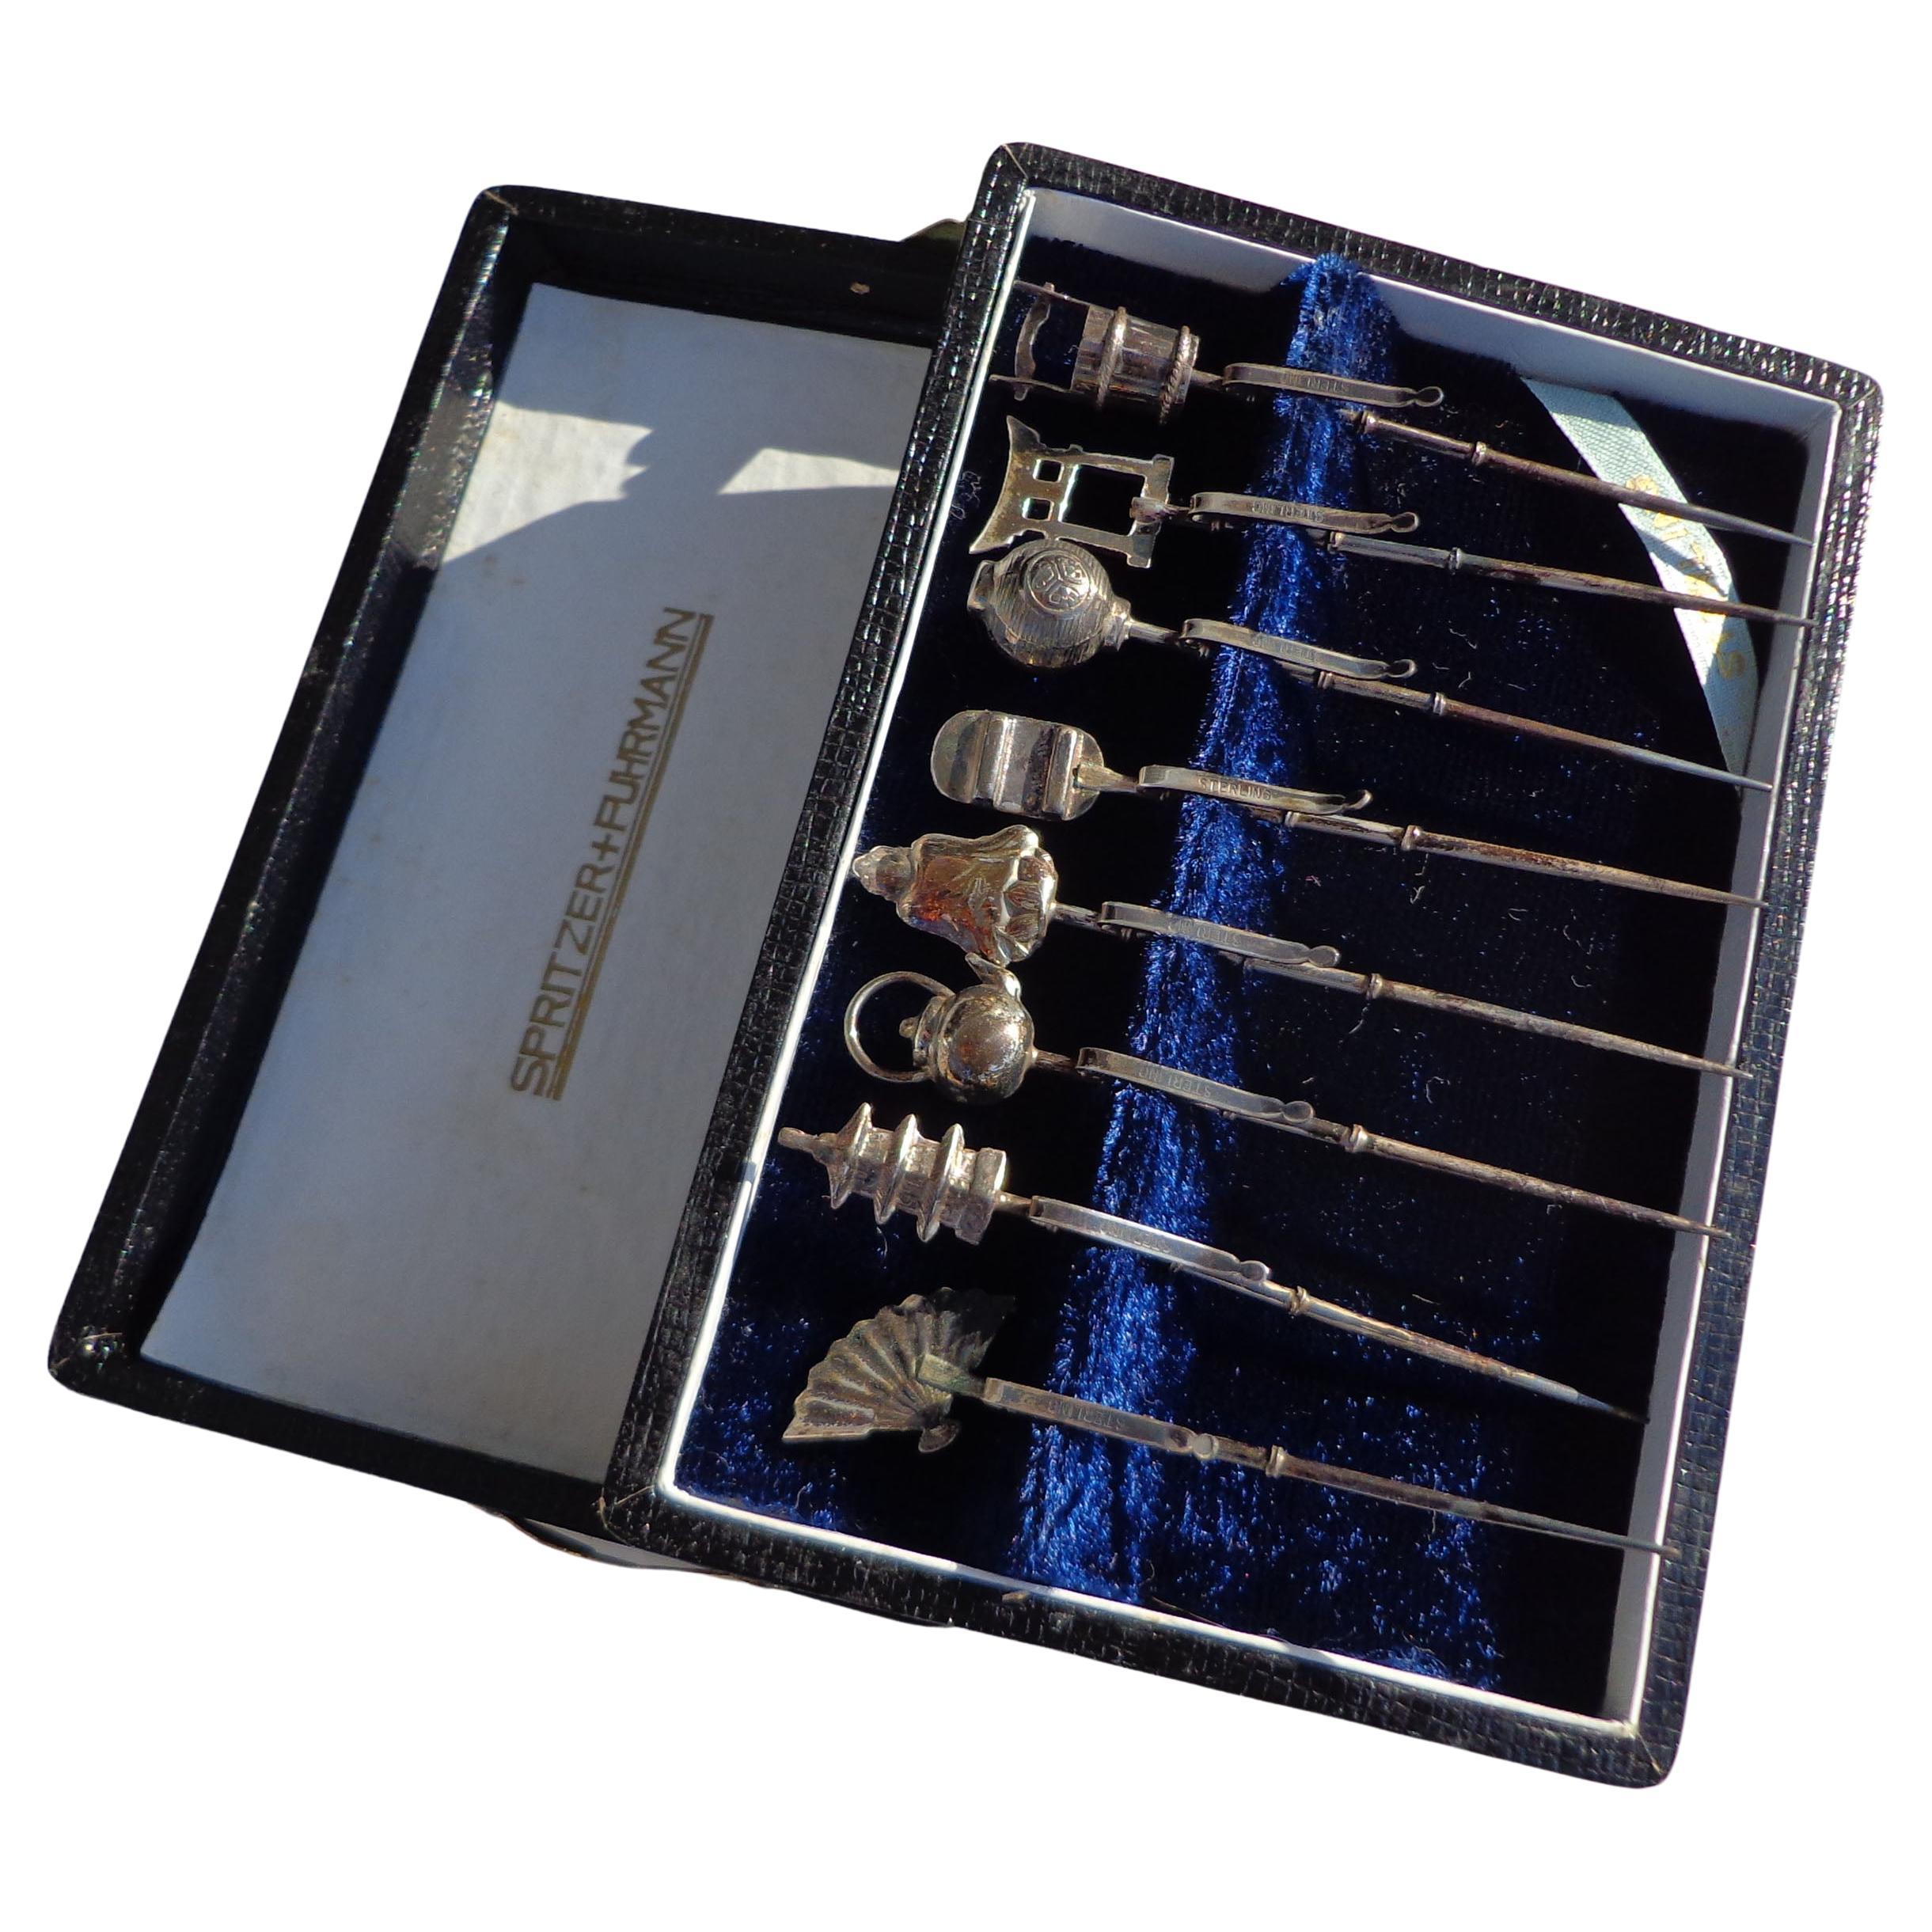 Set of 8 Oriental Hair Pins by Spritzer + Fuhrman




Sterling silver individual pins including a Buddha, pagoda, water vessel, kettle and a fan.
Beautifully boxed and marked.

Box side
5.25 Width x 3.5 Depth x 1  Height

Pins
Average length 3 